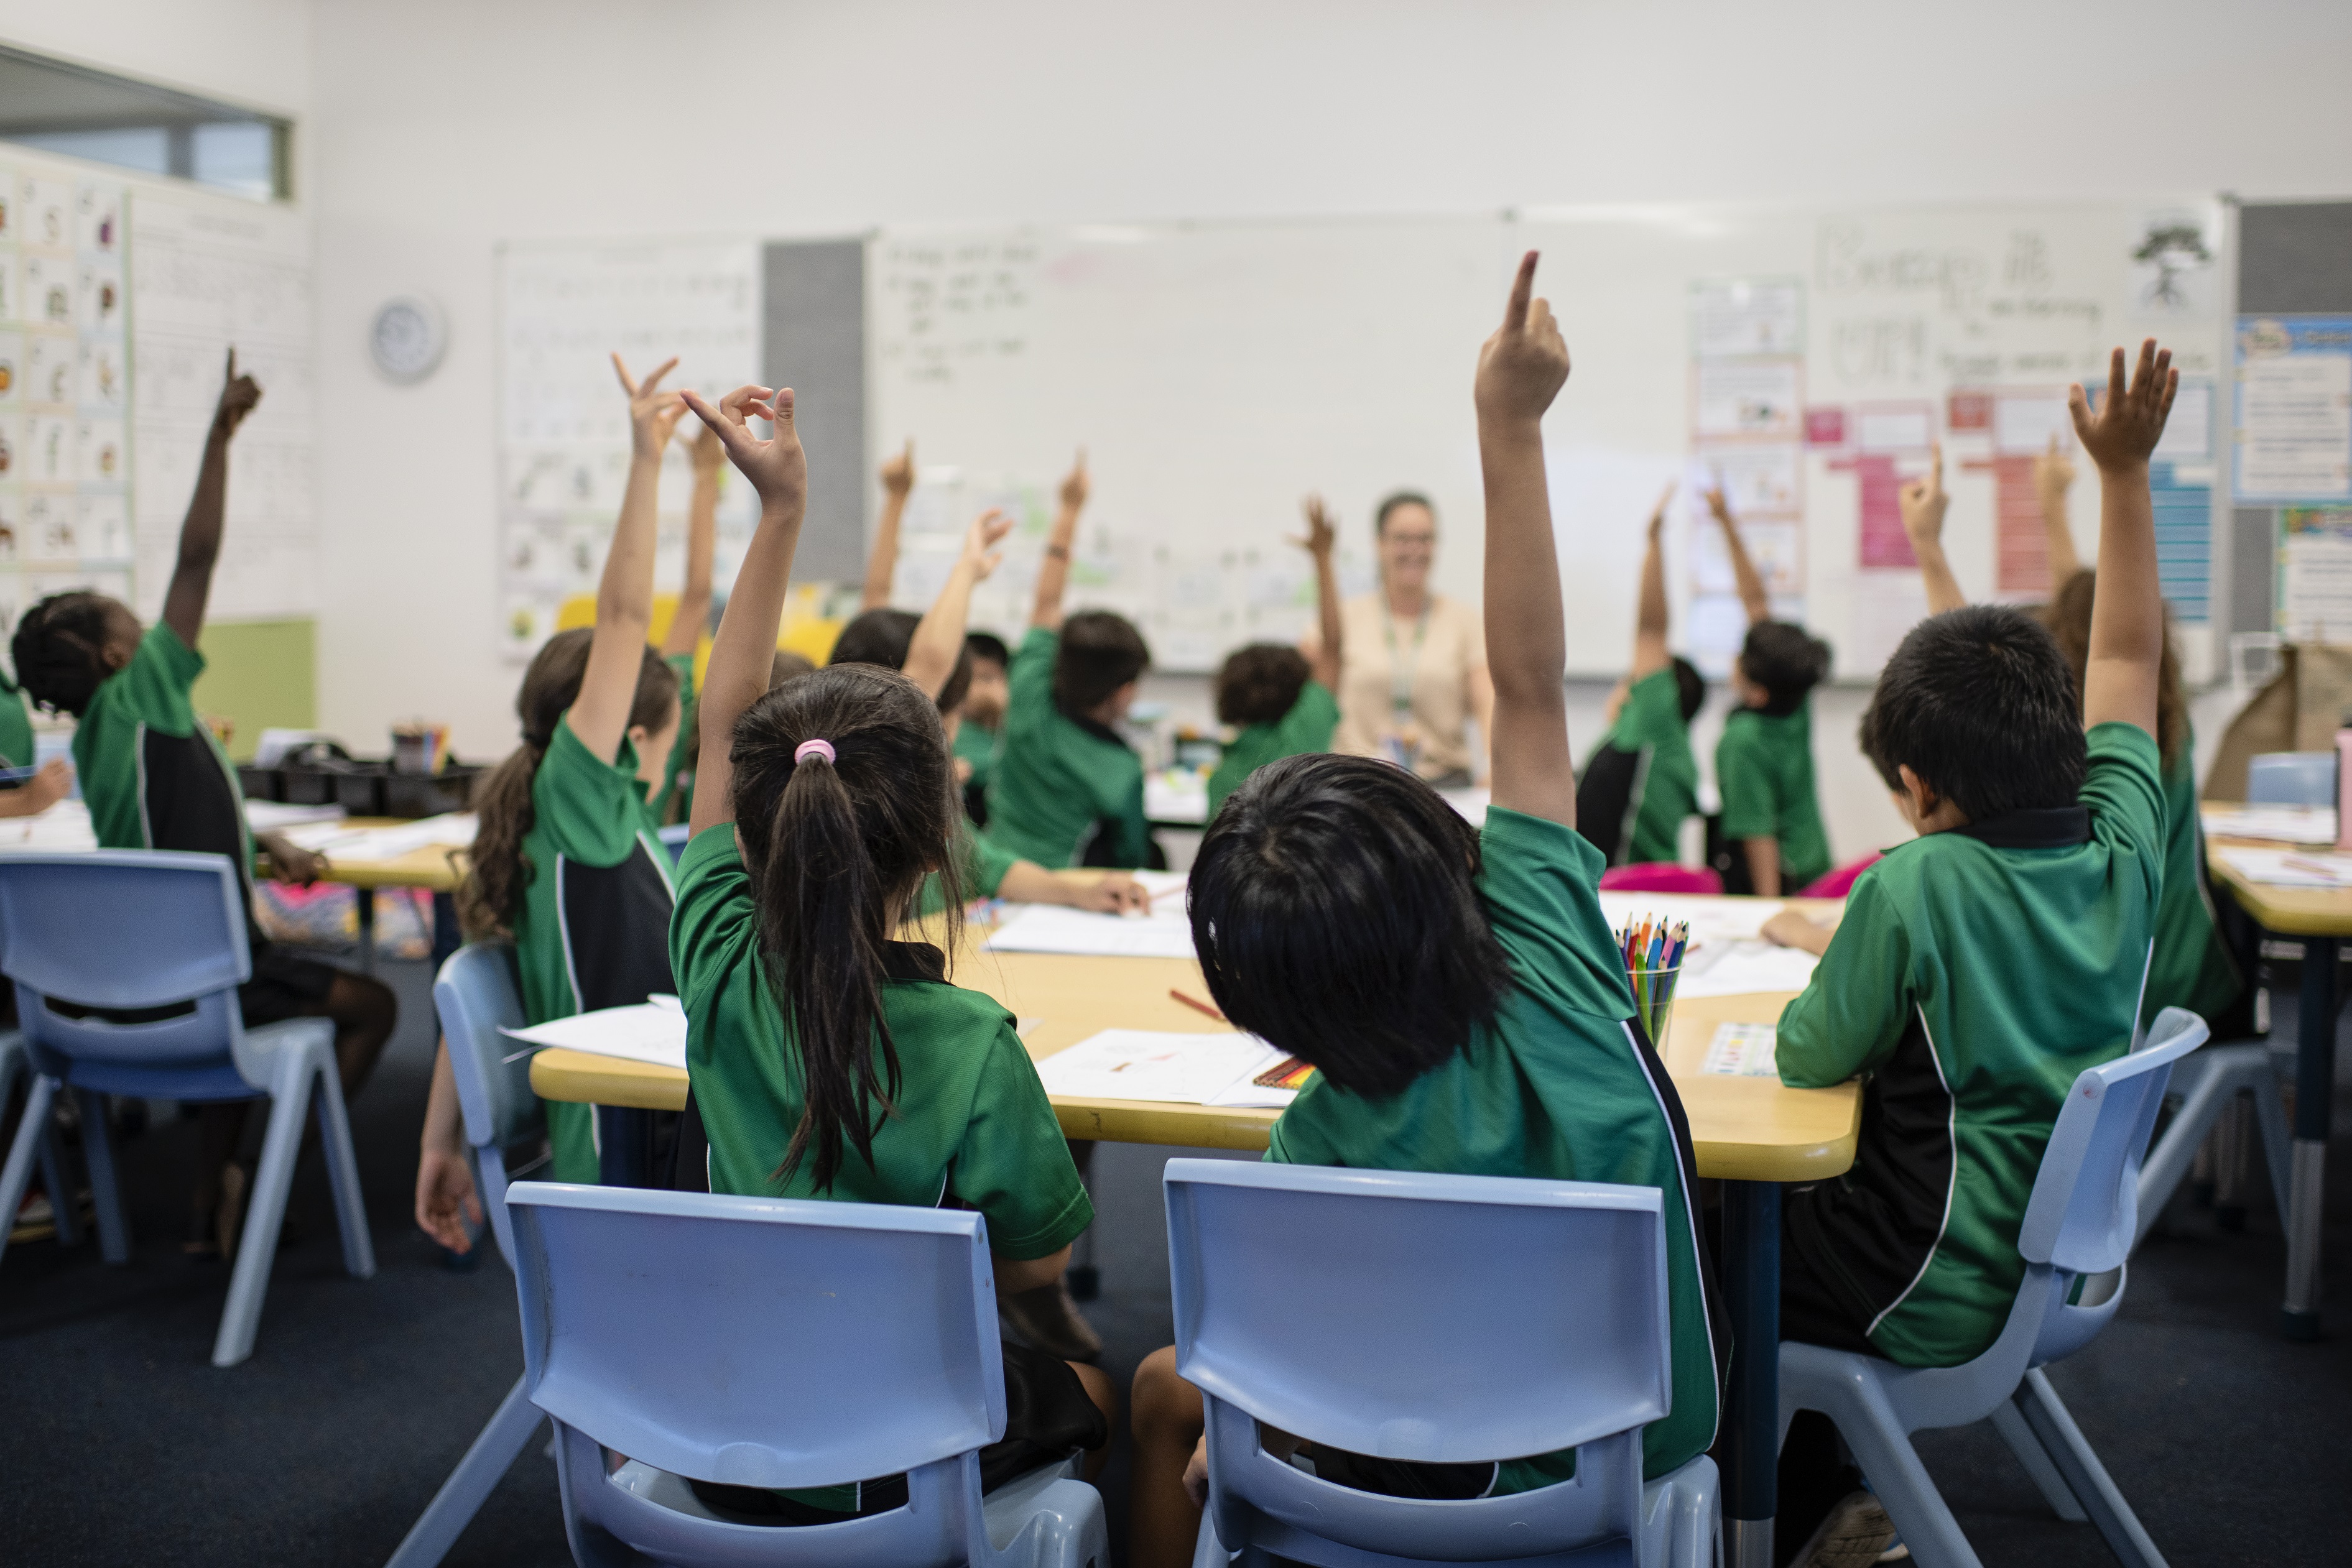 Children with their arms up in a classroom